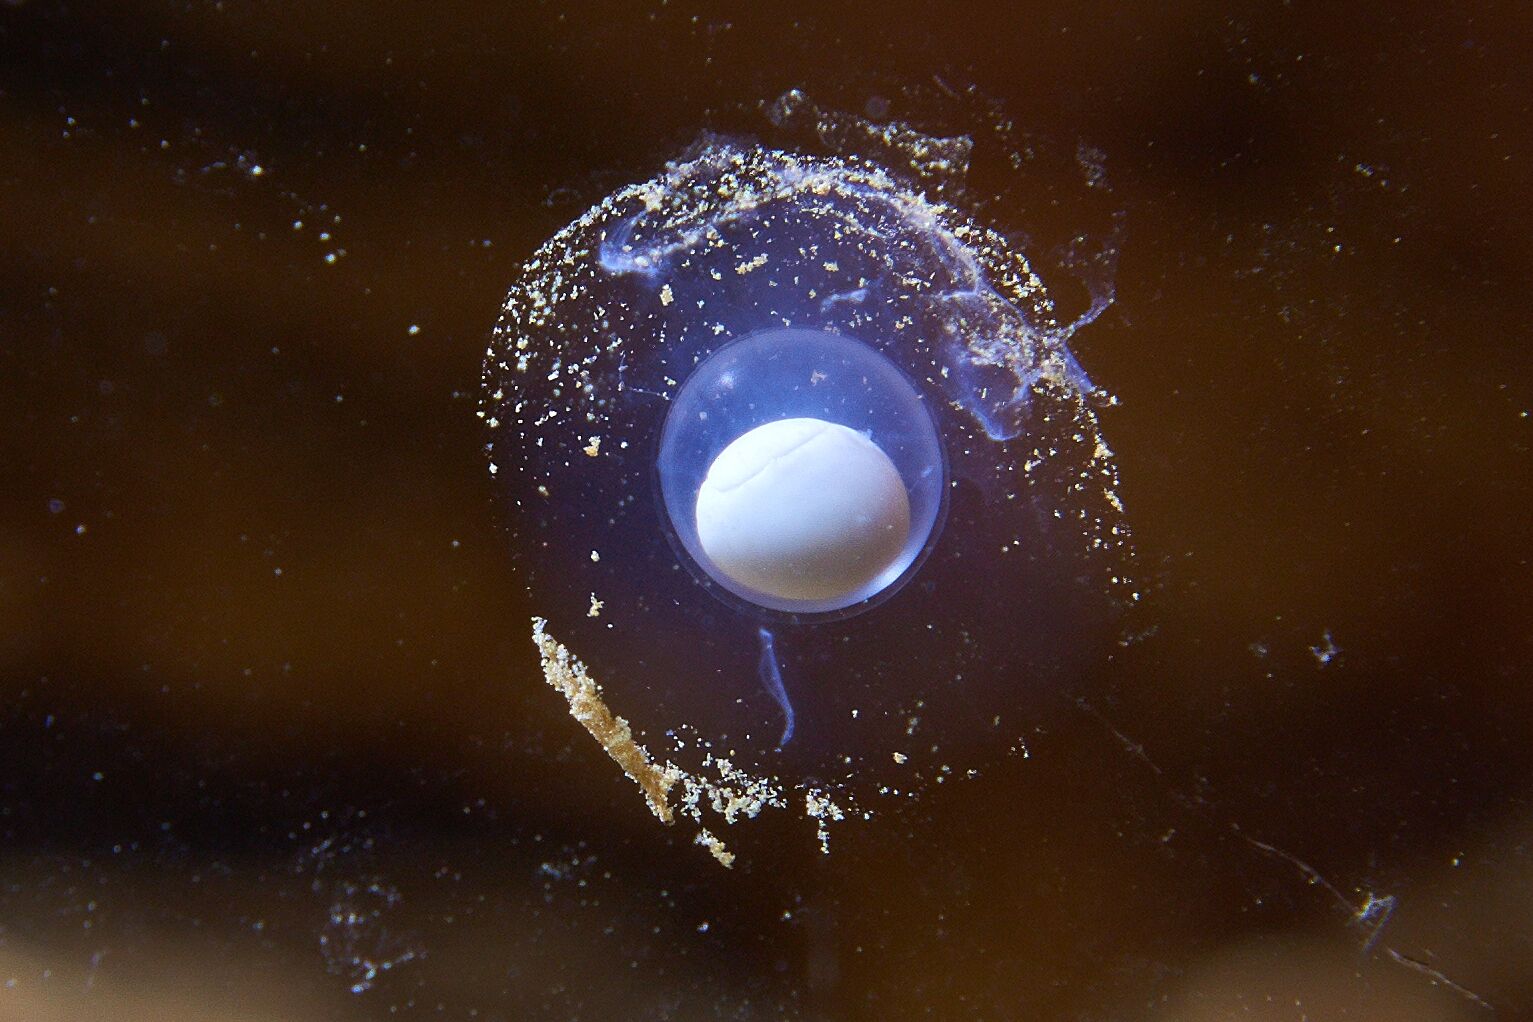 A close up of the first olm egg. Image credit: Postojna Cave Park.